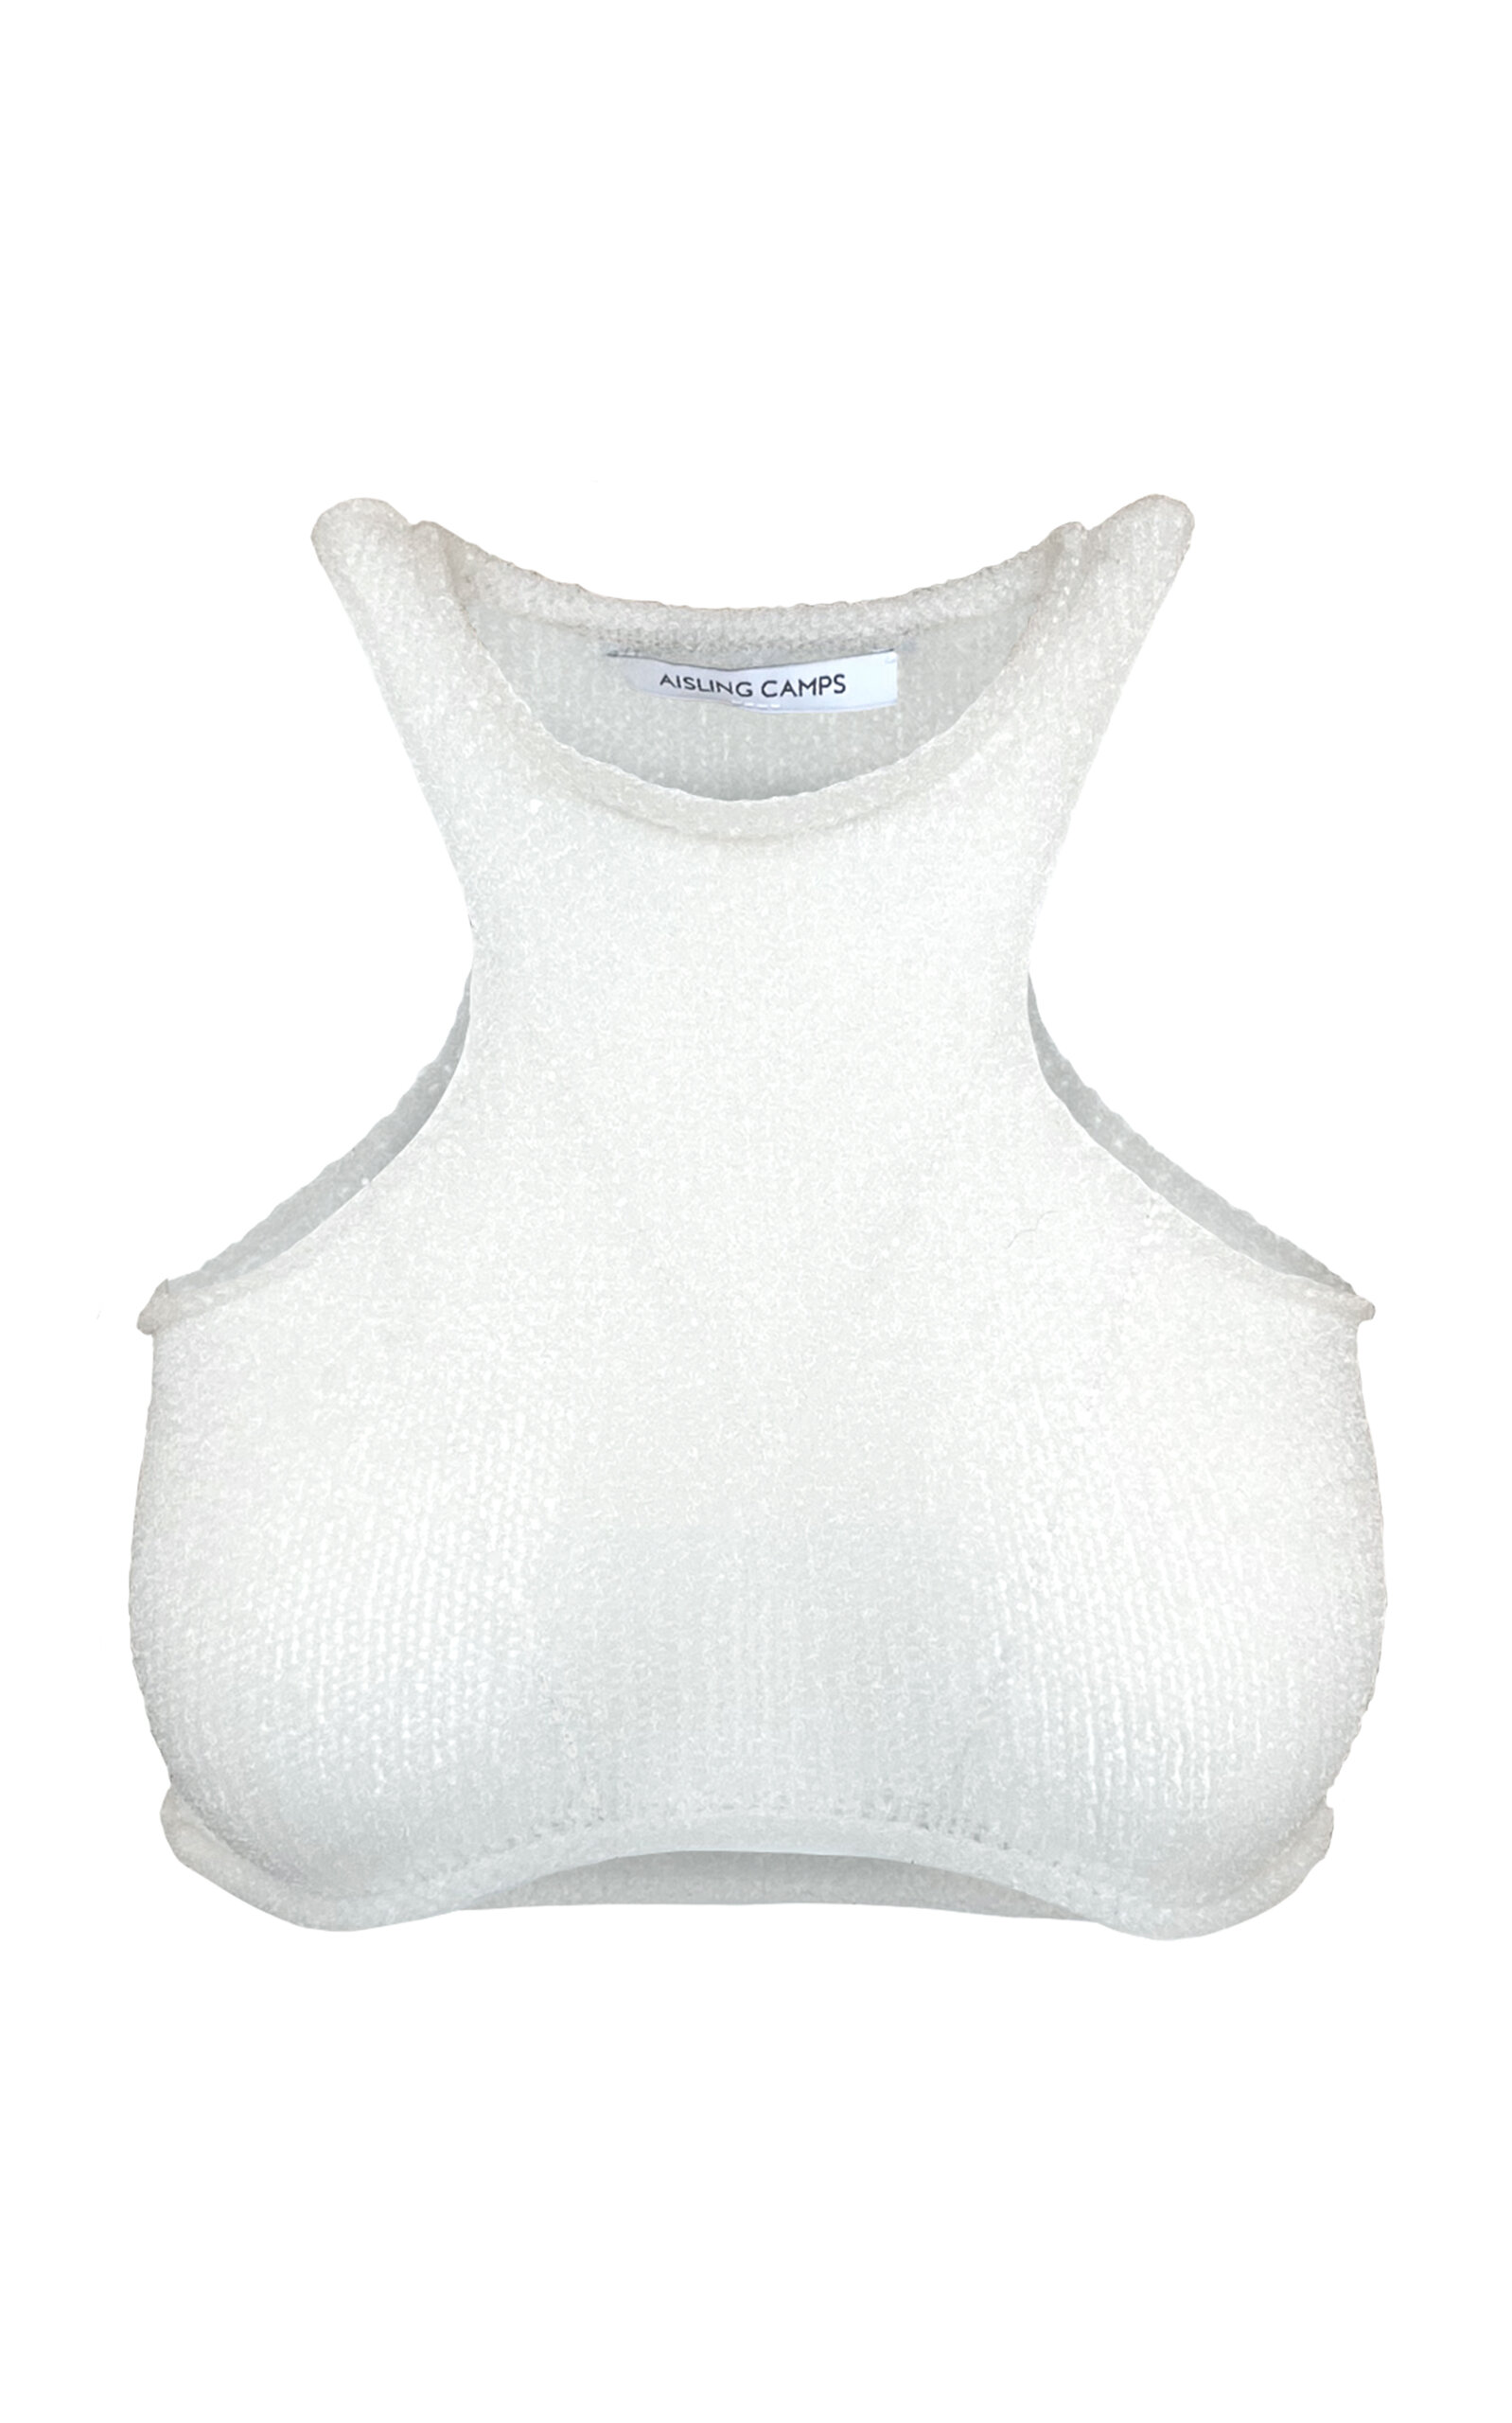 Aisling Camps Cloud Cropped Knit Nylon Bra Top In White